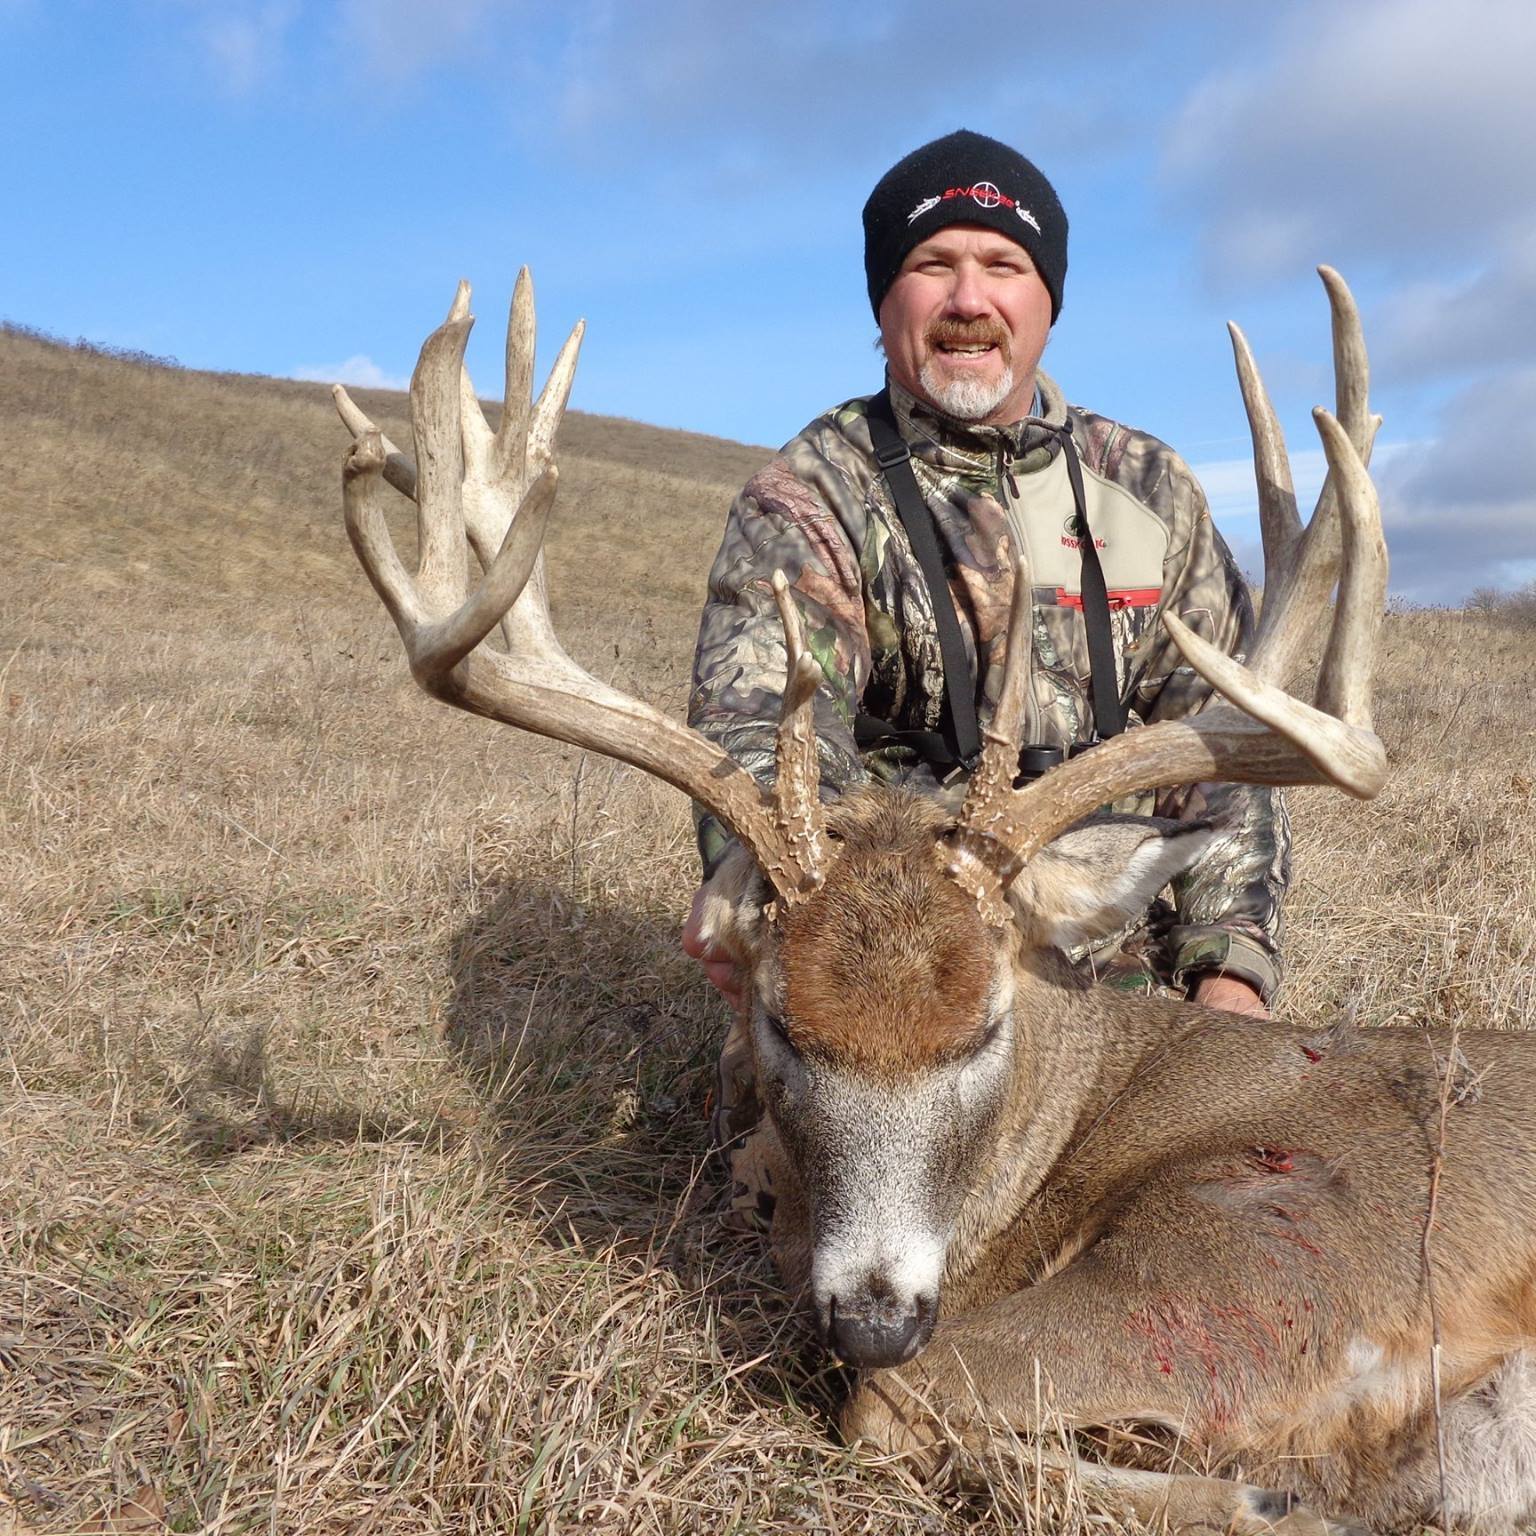 A Guides Note: Mark Warr -- His Favorite Hunting Moments and Stories